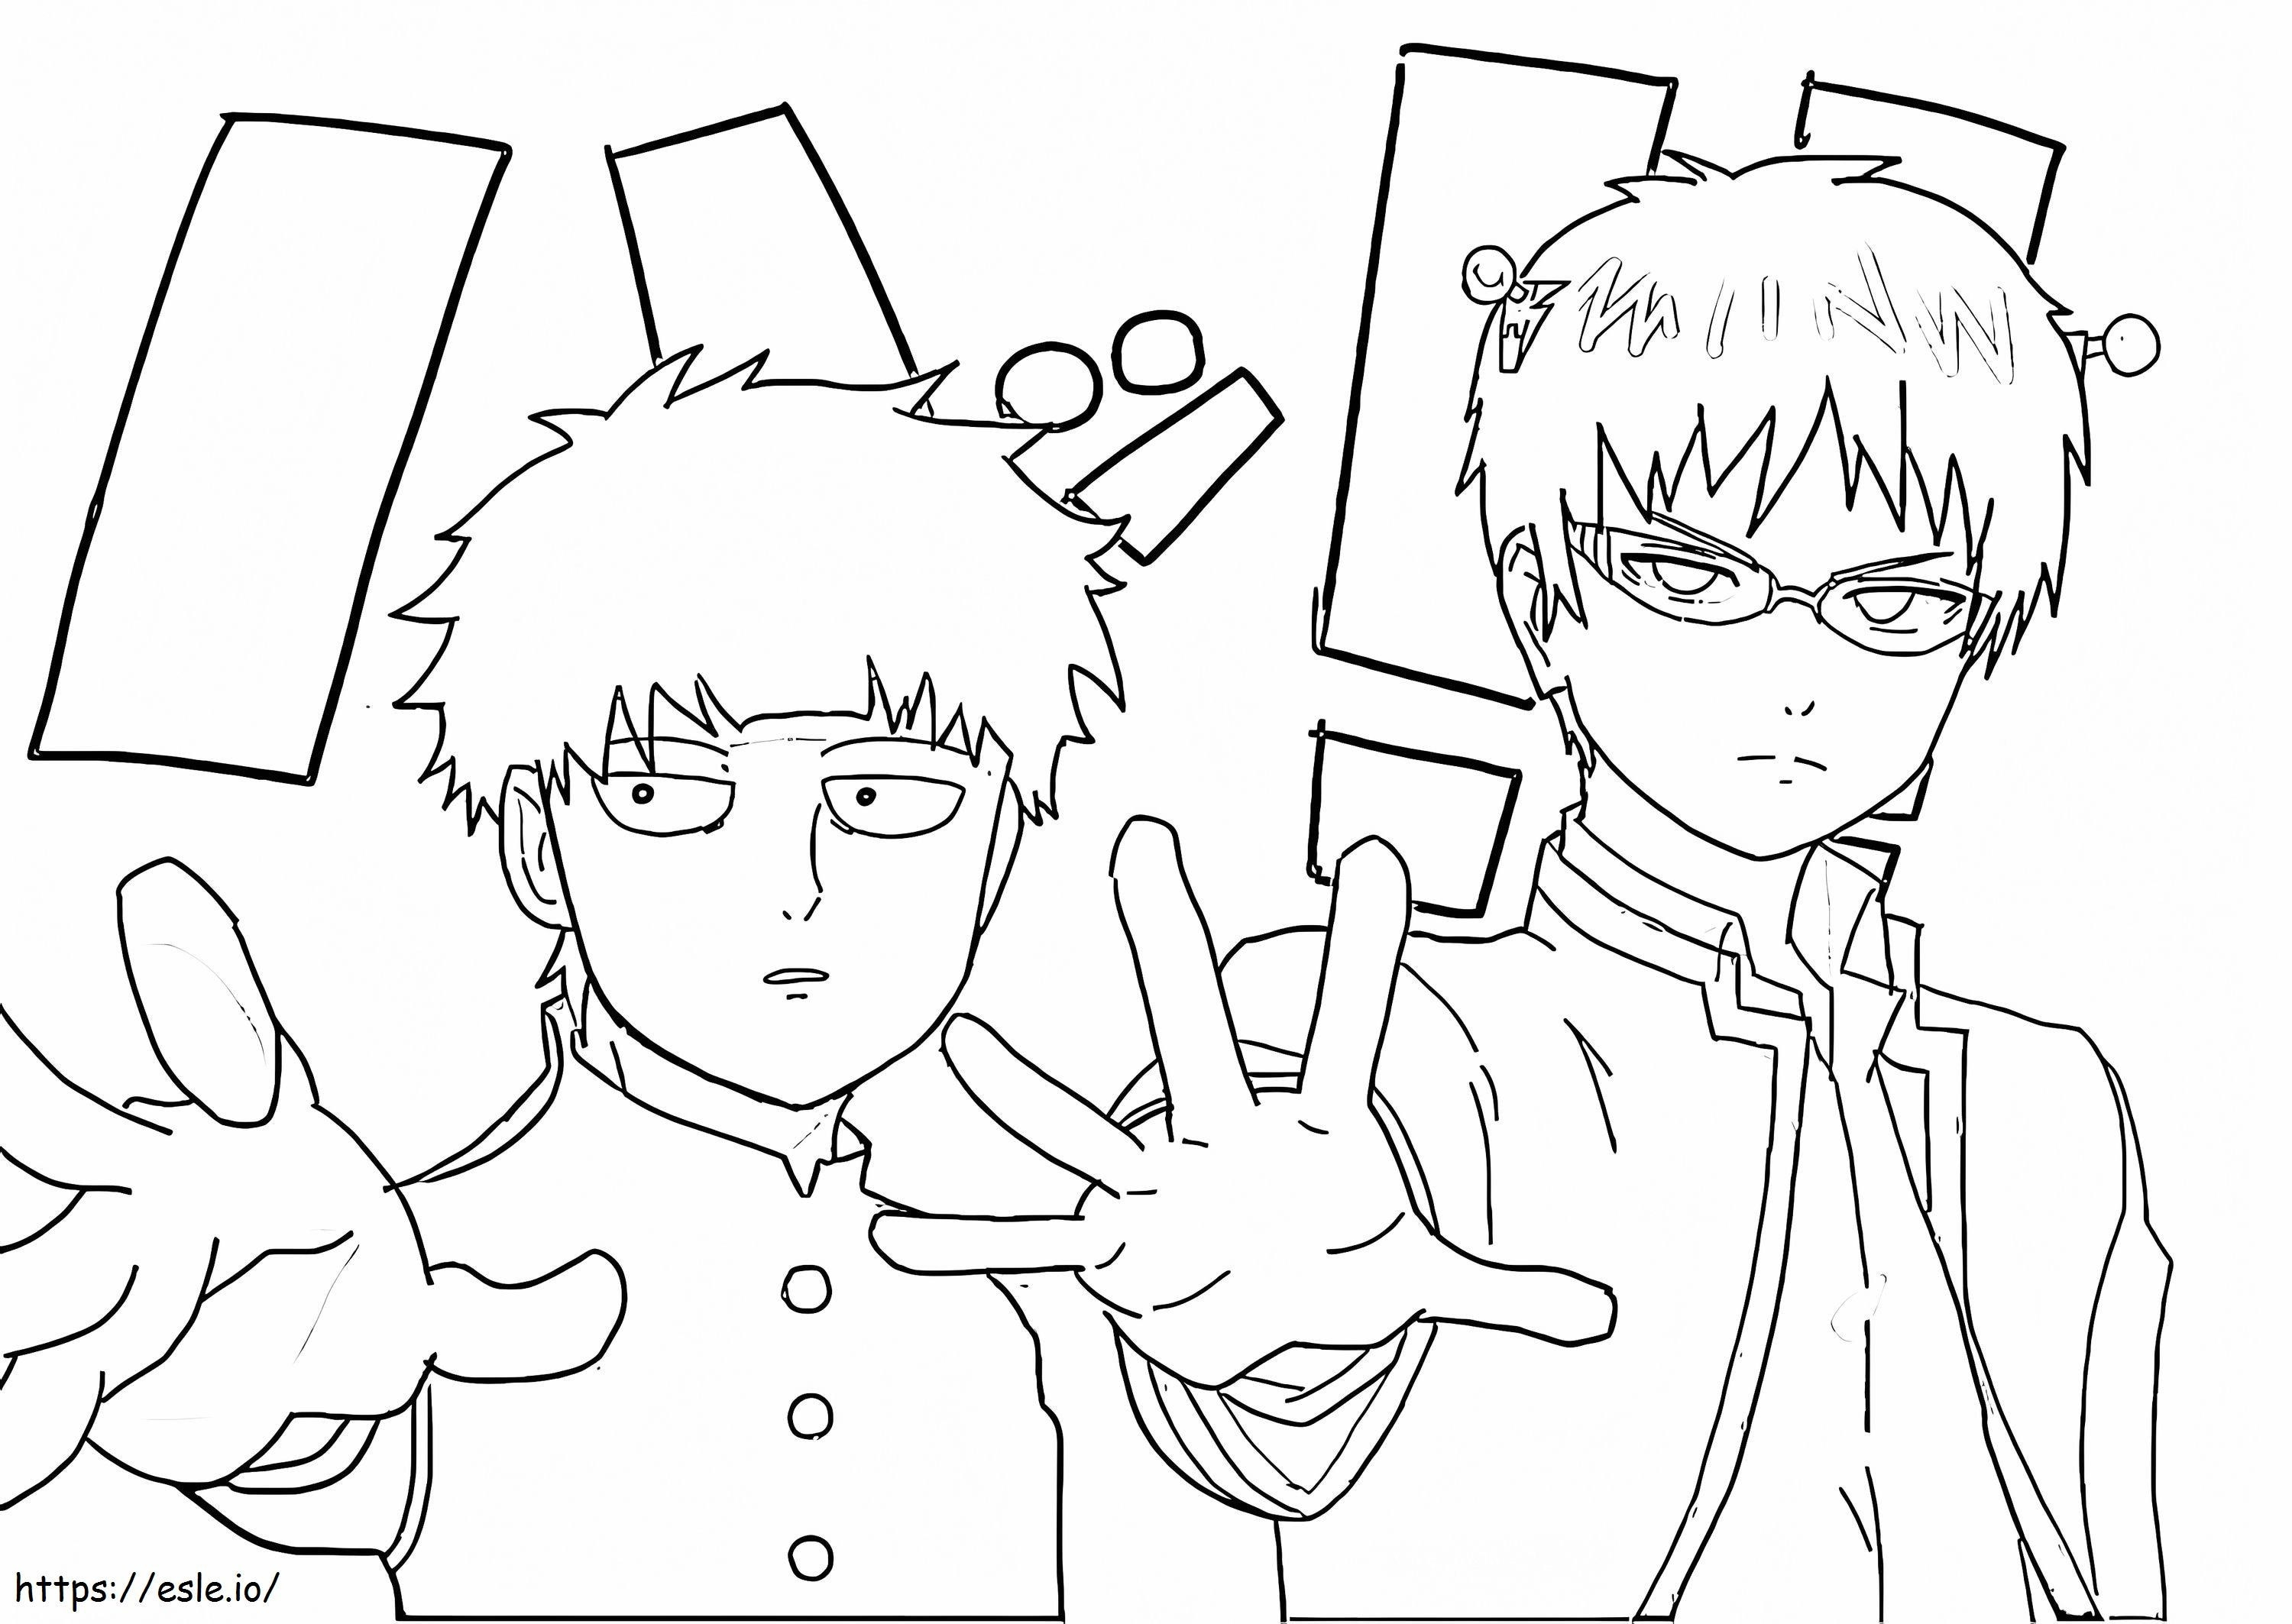 Now K And Mob coloring page